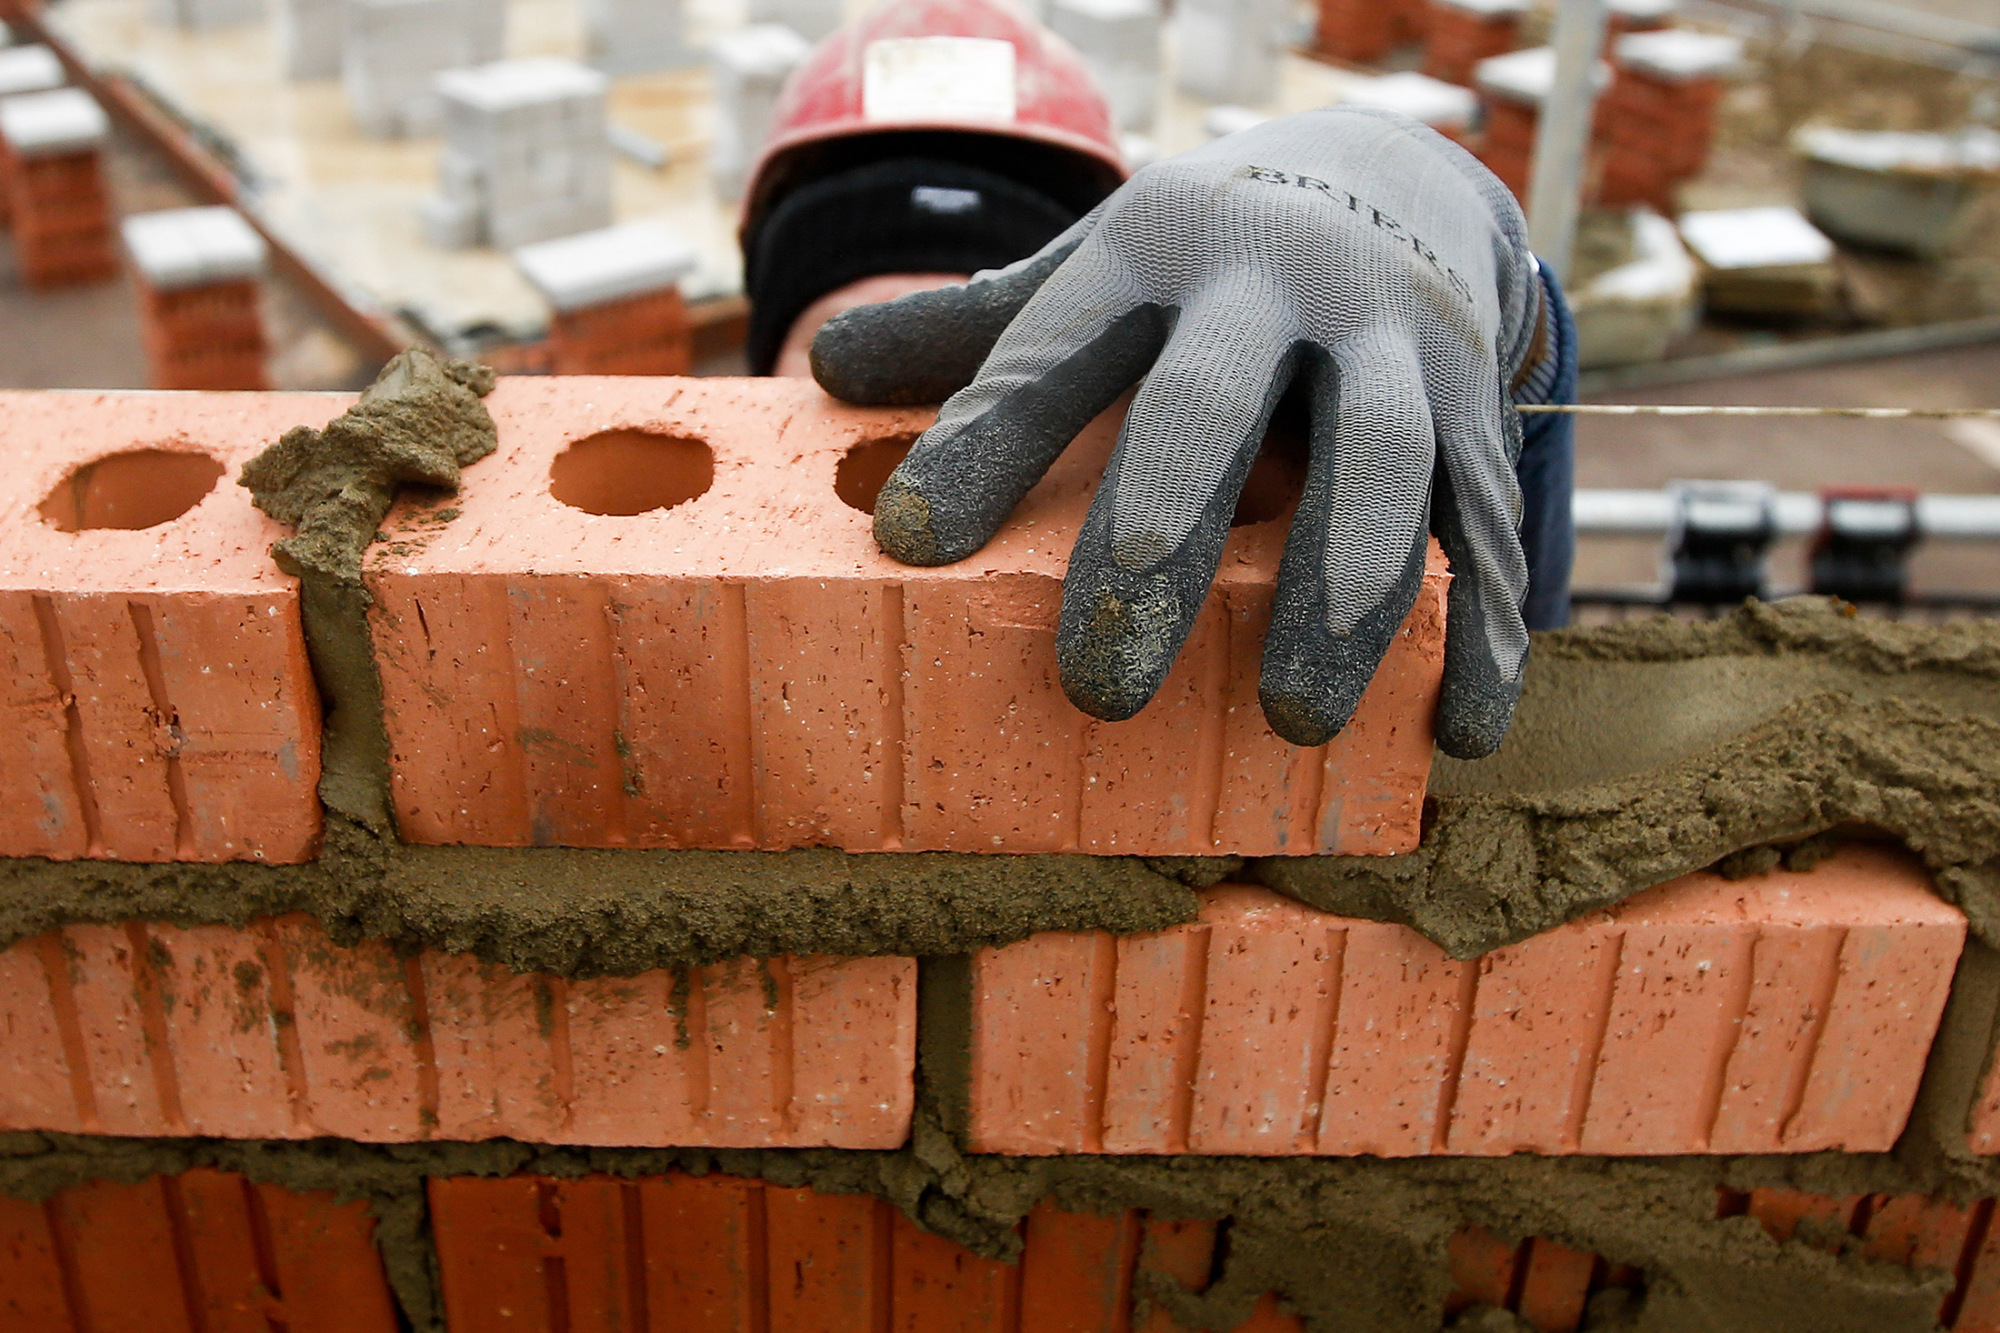 A construction worker lays bricks at a Persimmon Plc residential property construction site in Cranfield, U.K., on Tuesday, Jan. 6, 2016. The average price of a home rose 0.8 percent to 196,999 pounds ($292,100) from November, the most since April, Nationwide Building Society said in a statement released at the end of December.
